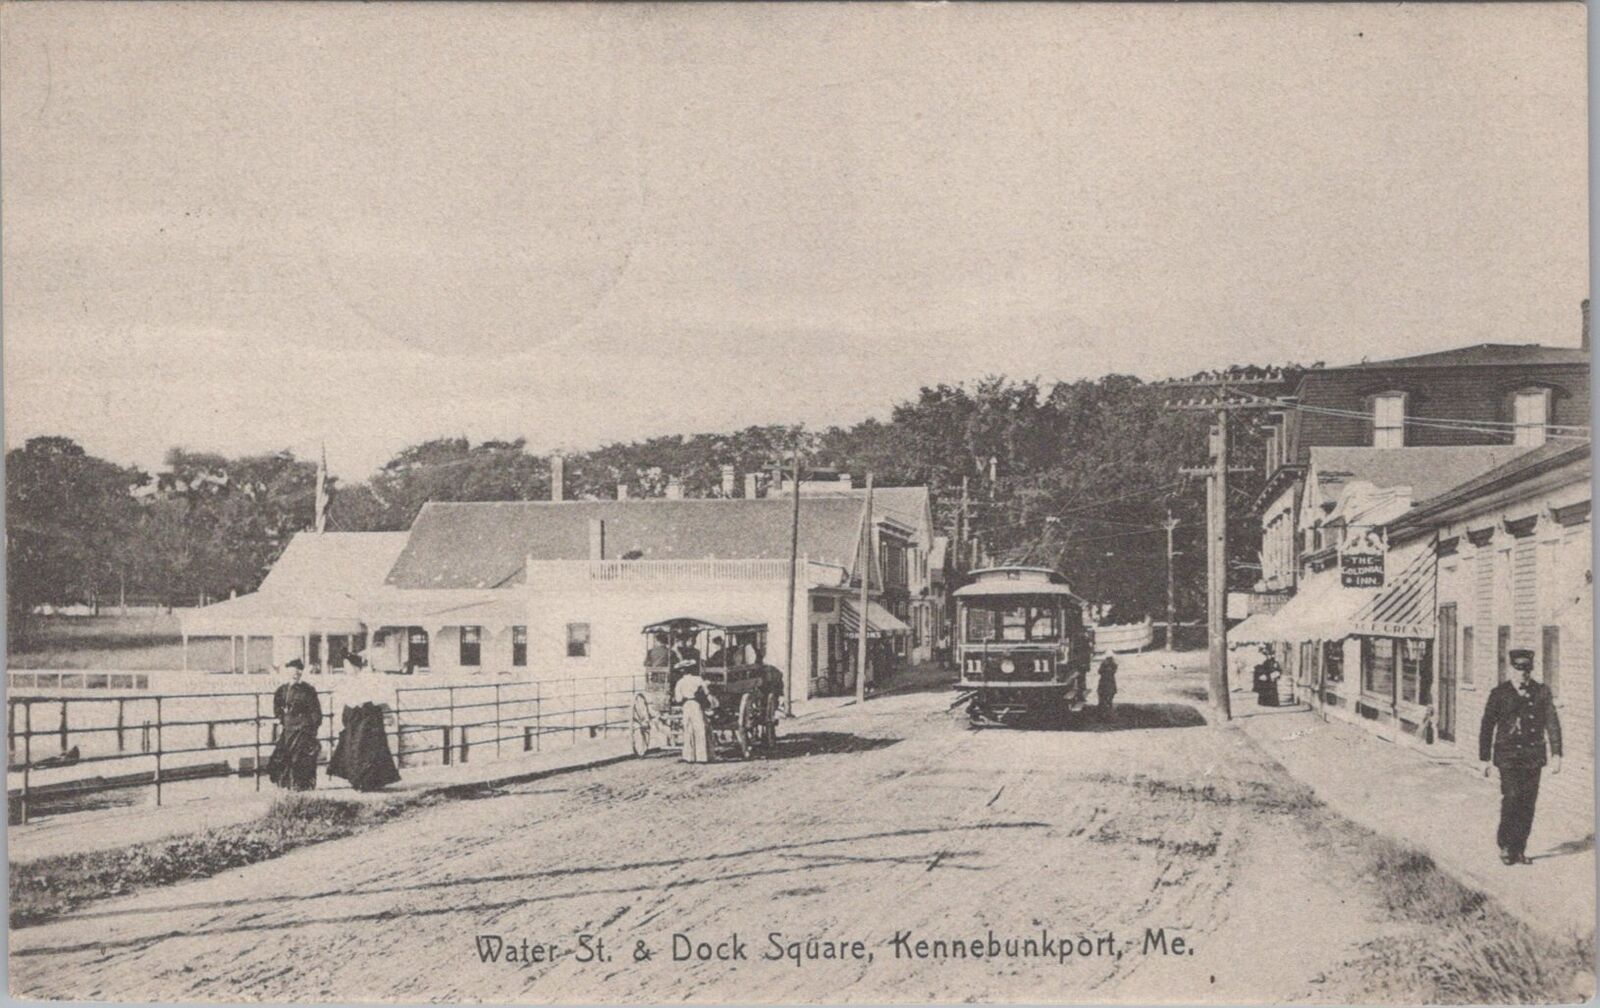 Water St. & Dock Square Kennebunkport Maine Trolley Colonial Inn 1907 Postcard